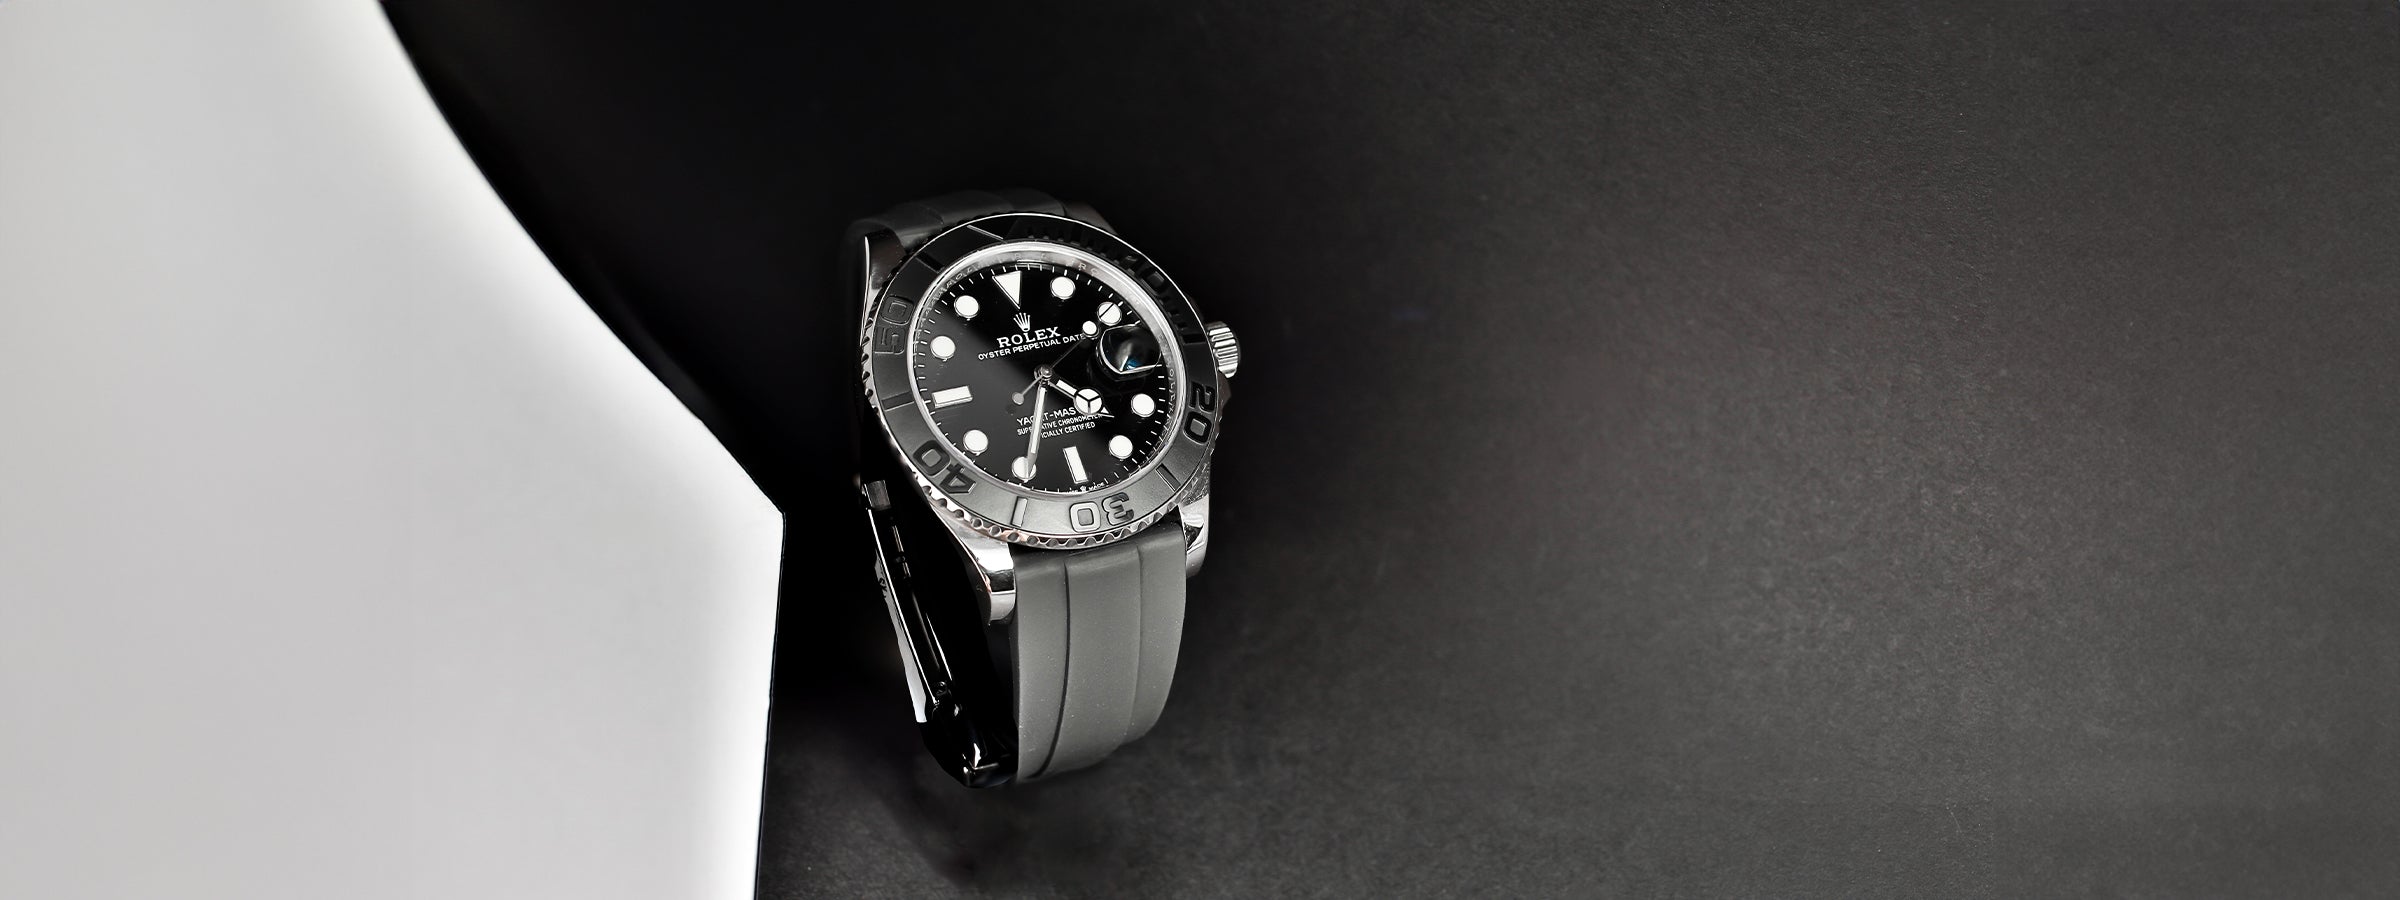 Top Trusted Dealer to Consider for Used Rolex Purchases in Chicago